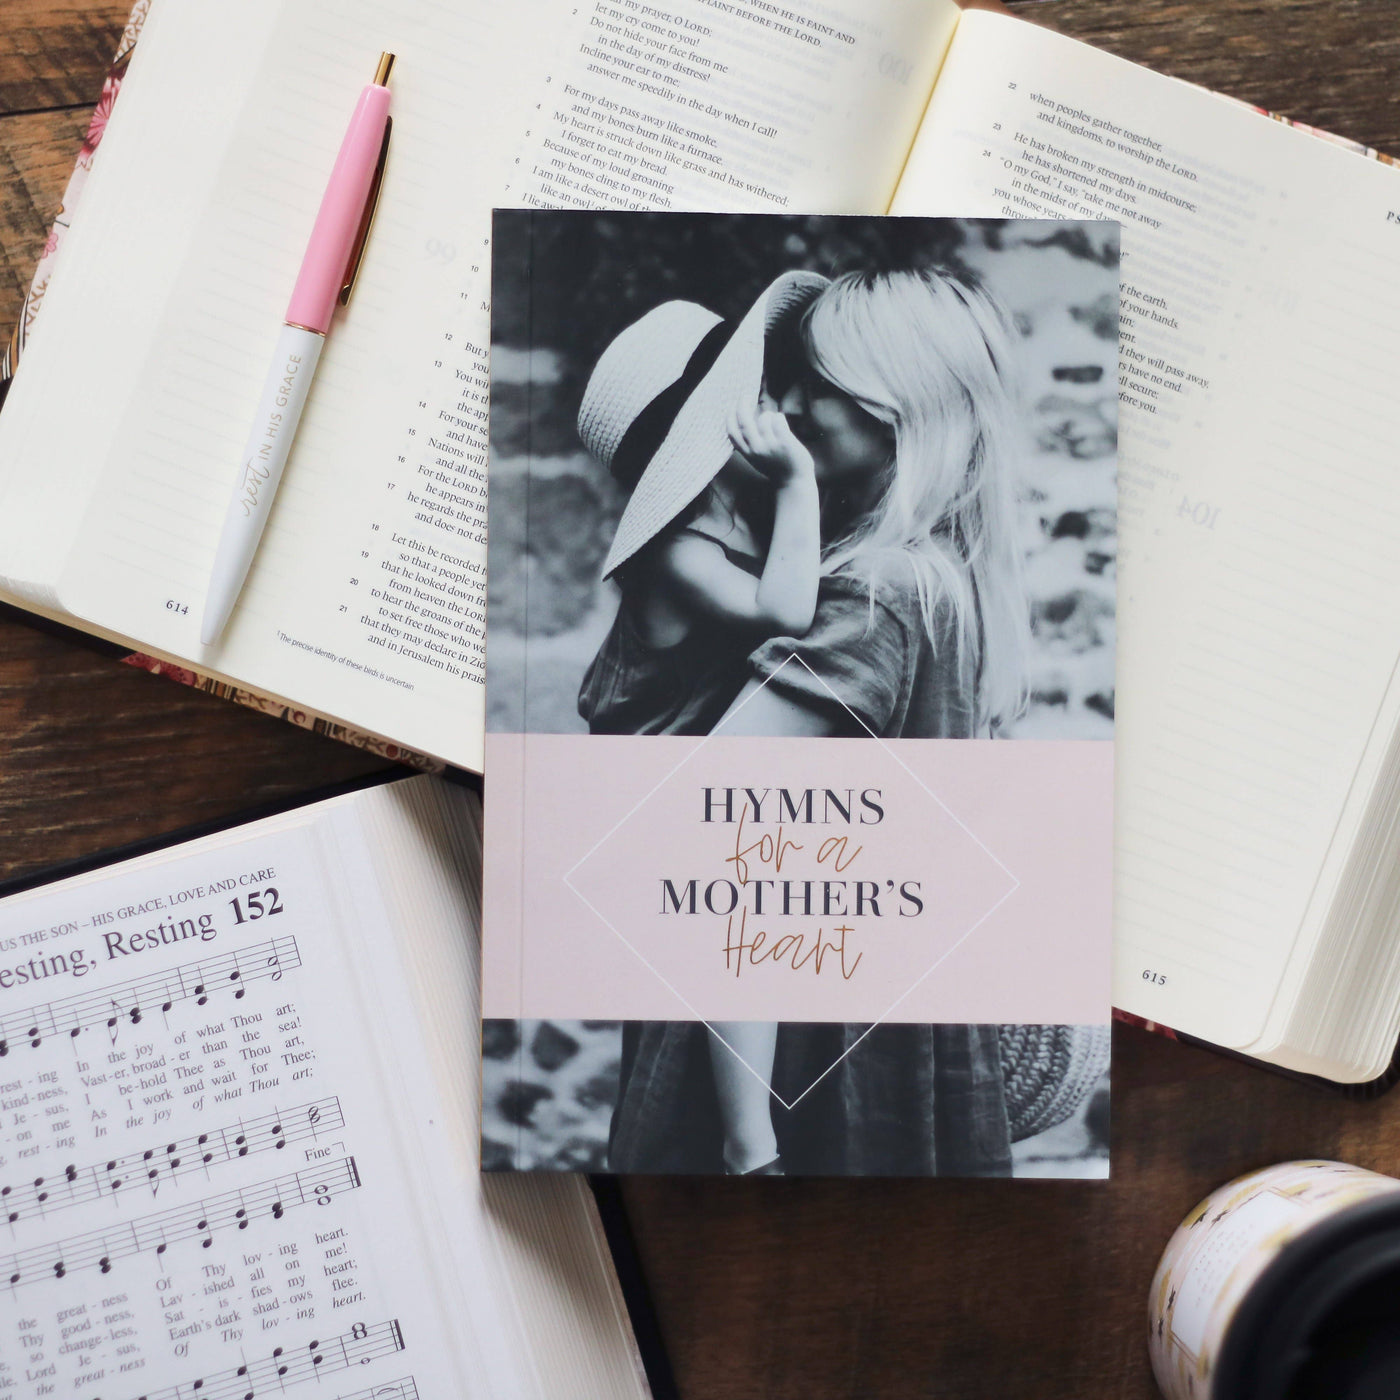 HYMNS FOR A MOTHER'S HEART